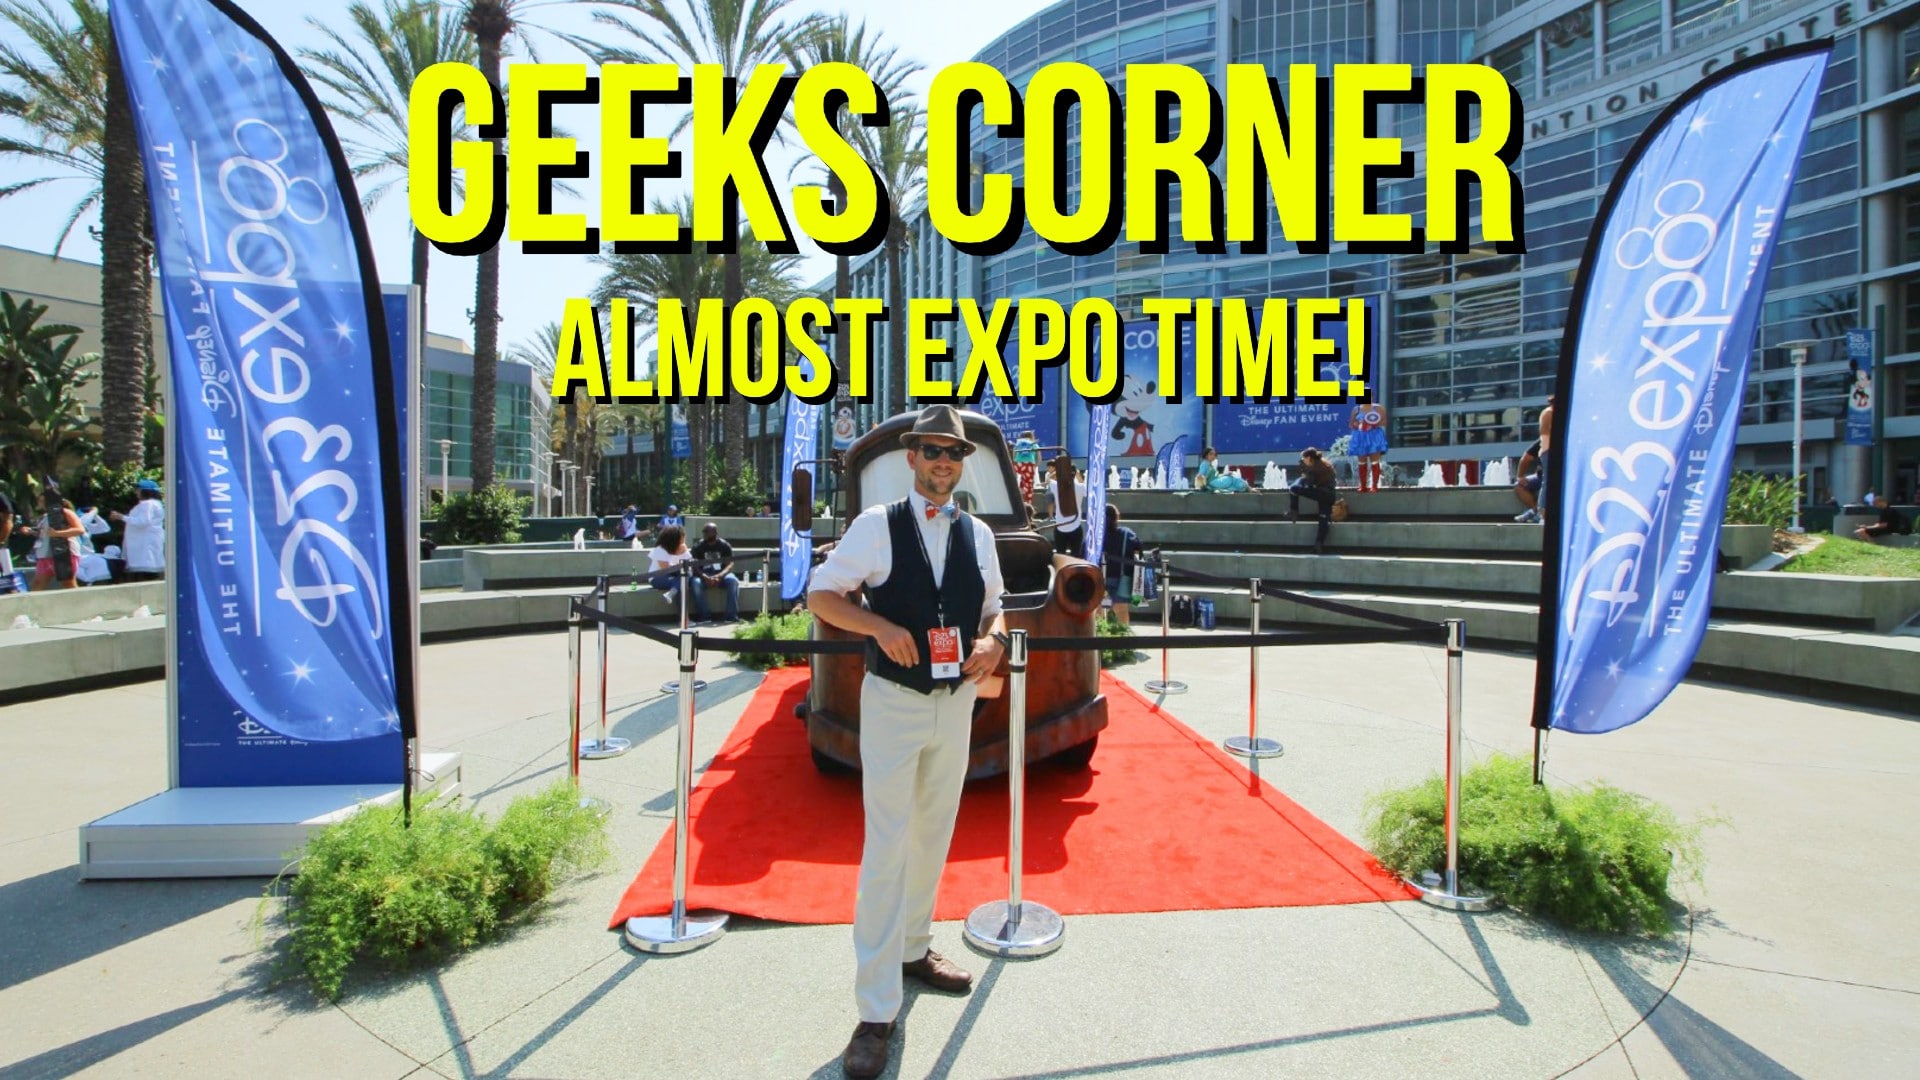 Almost Expo Time! – GEEKS CORNER – Episode 947 (#465)